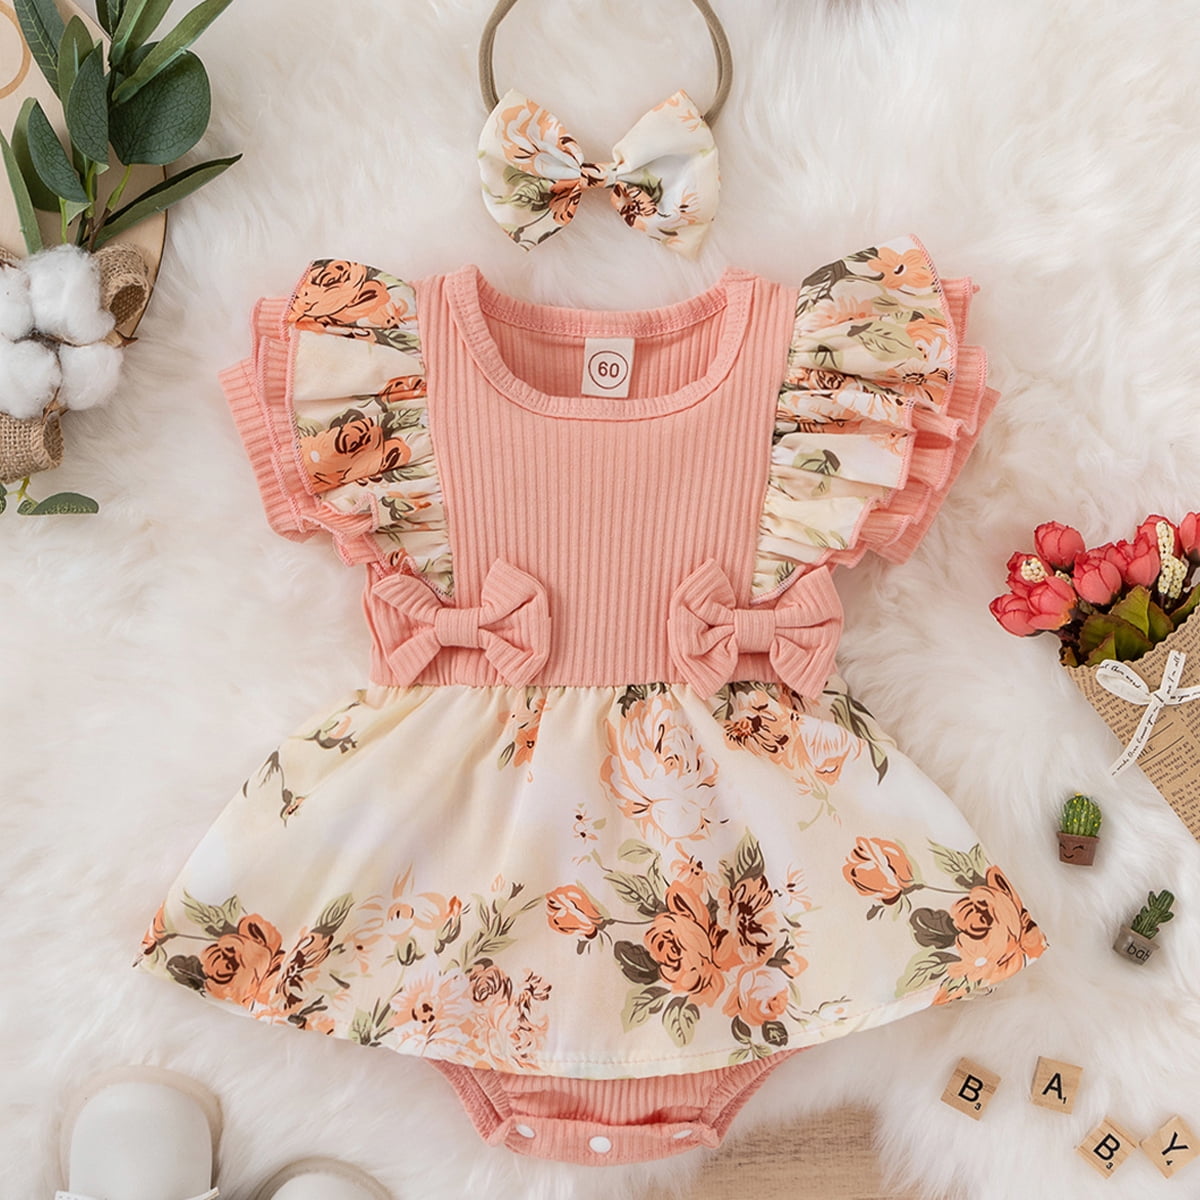 Zukuco Newborn Baby Girl Spring Summer Clothes Ruffle Sleeve Floral Dress  Jumpsuit Baby Outfit, Green 0-3 Months 